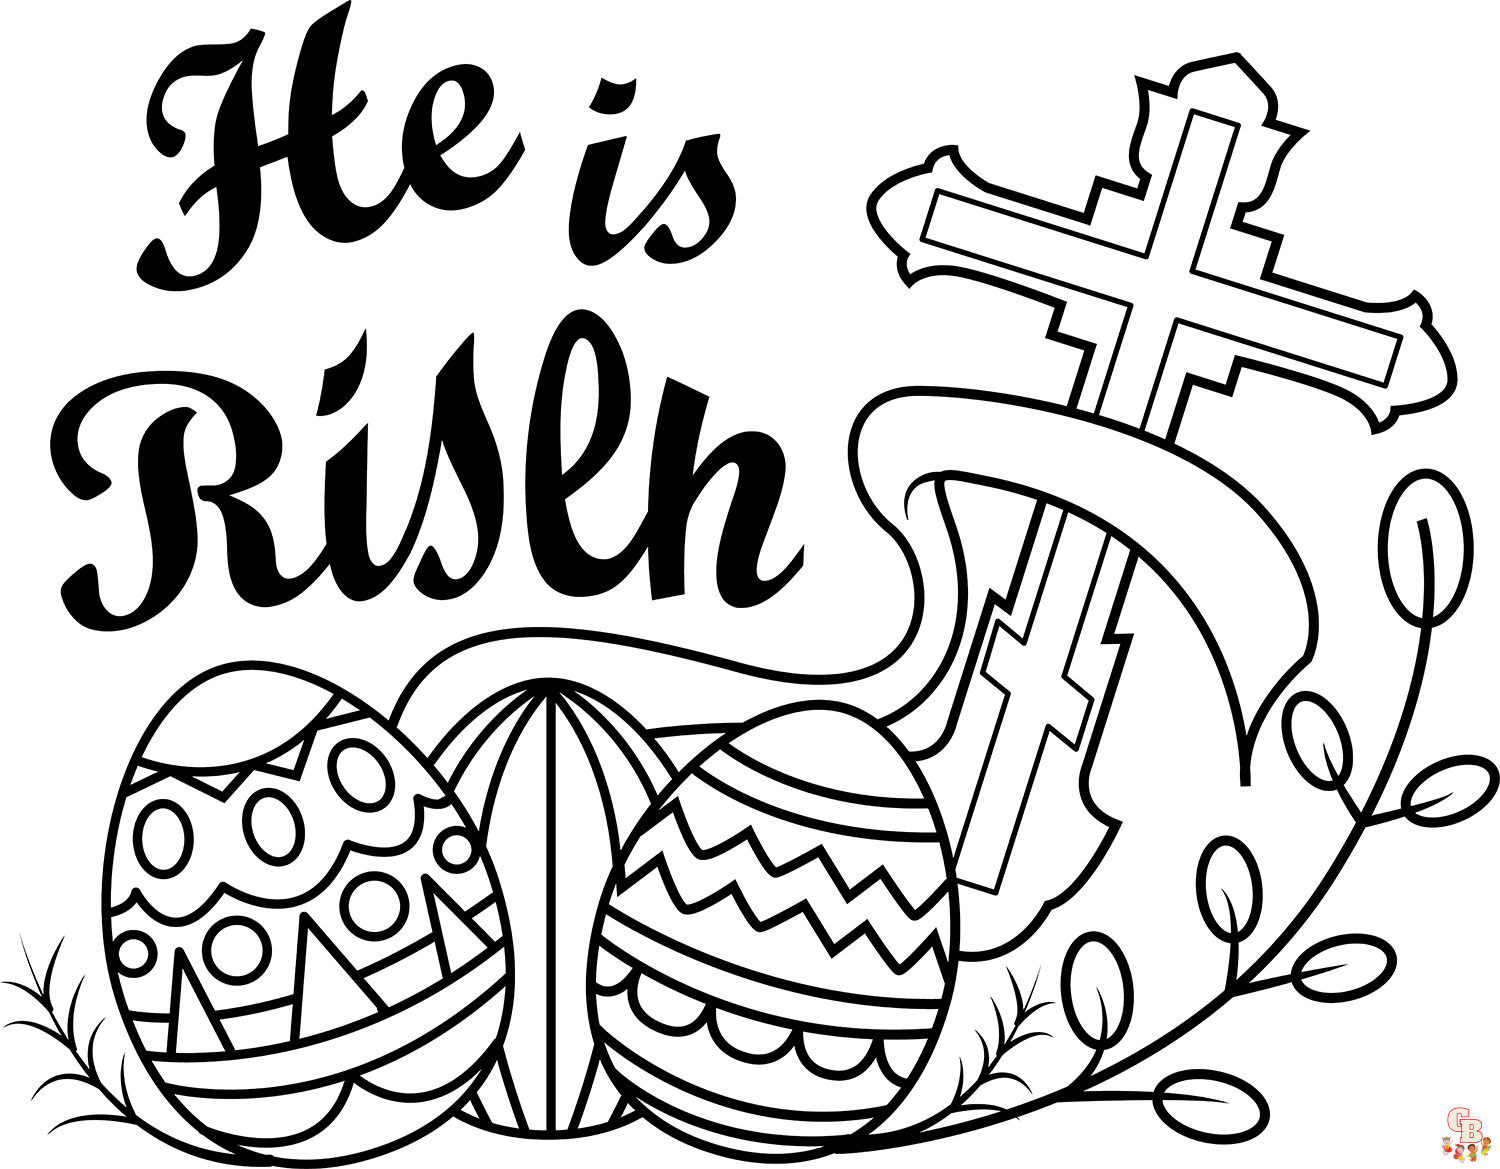 He Has Risen Coloring Pages 2